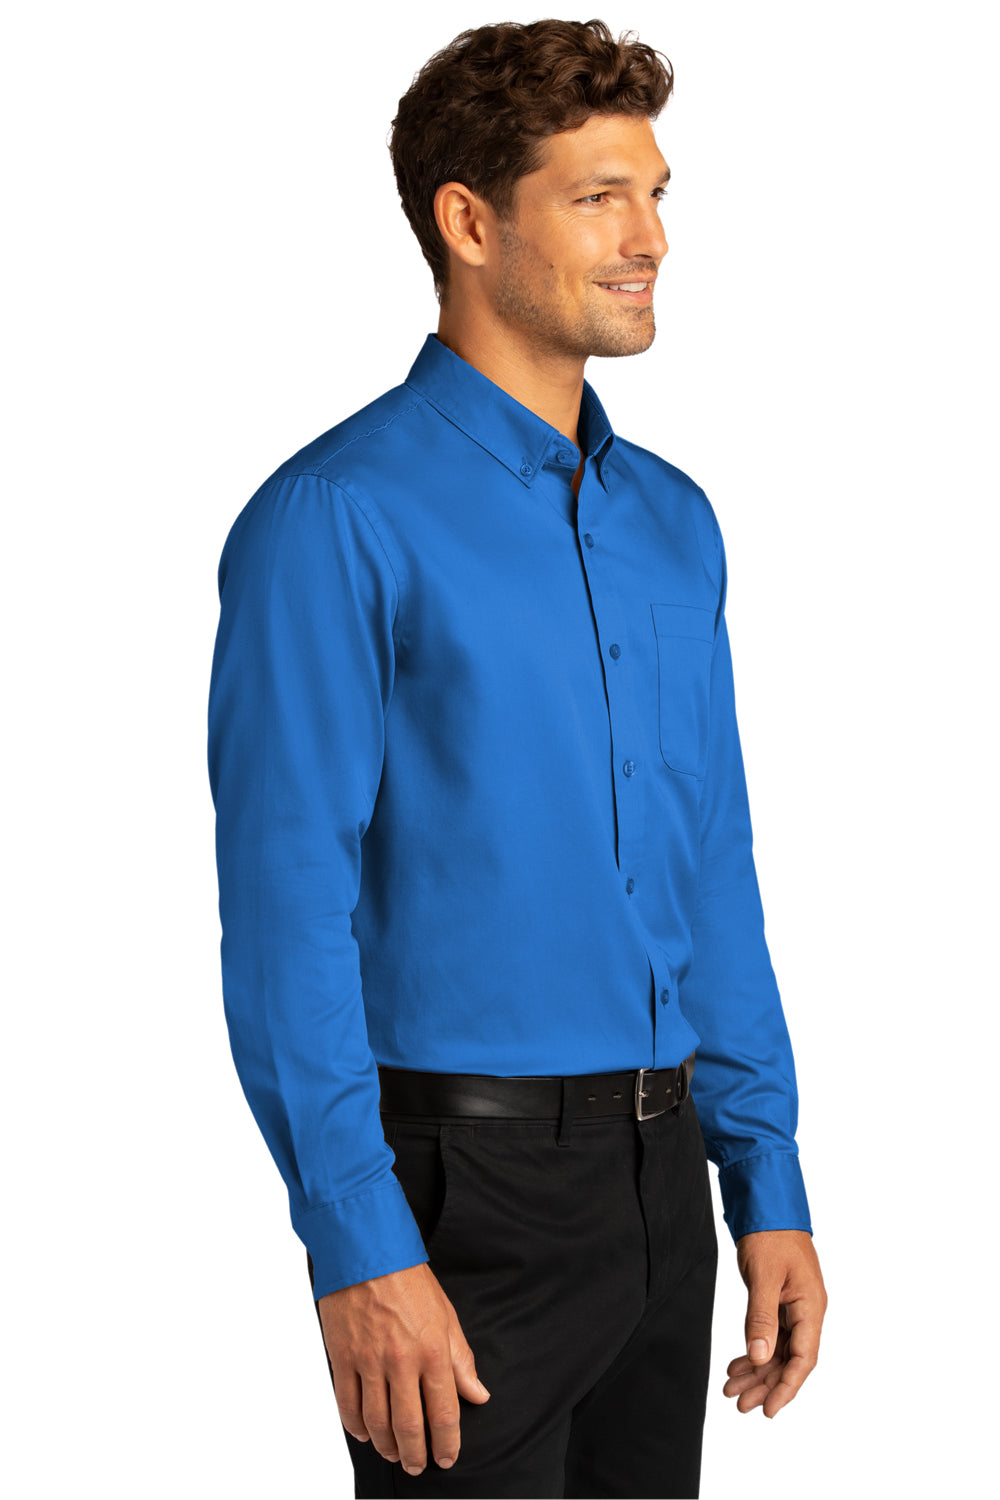 Port Authority W808 SuperPro Wrinkle Resistant React Long Sleeve Button Down Shirt w/ Pocket Strong Blue 3Q